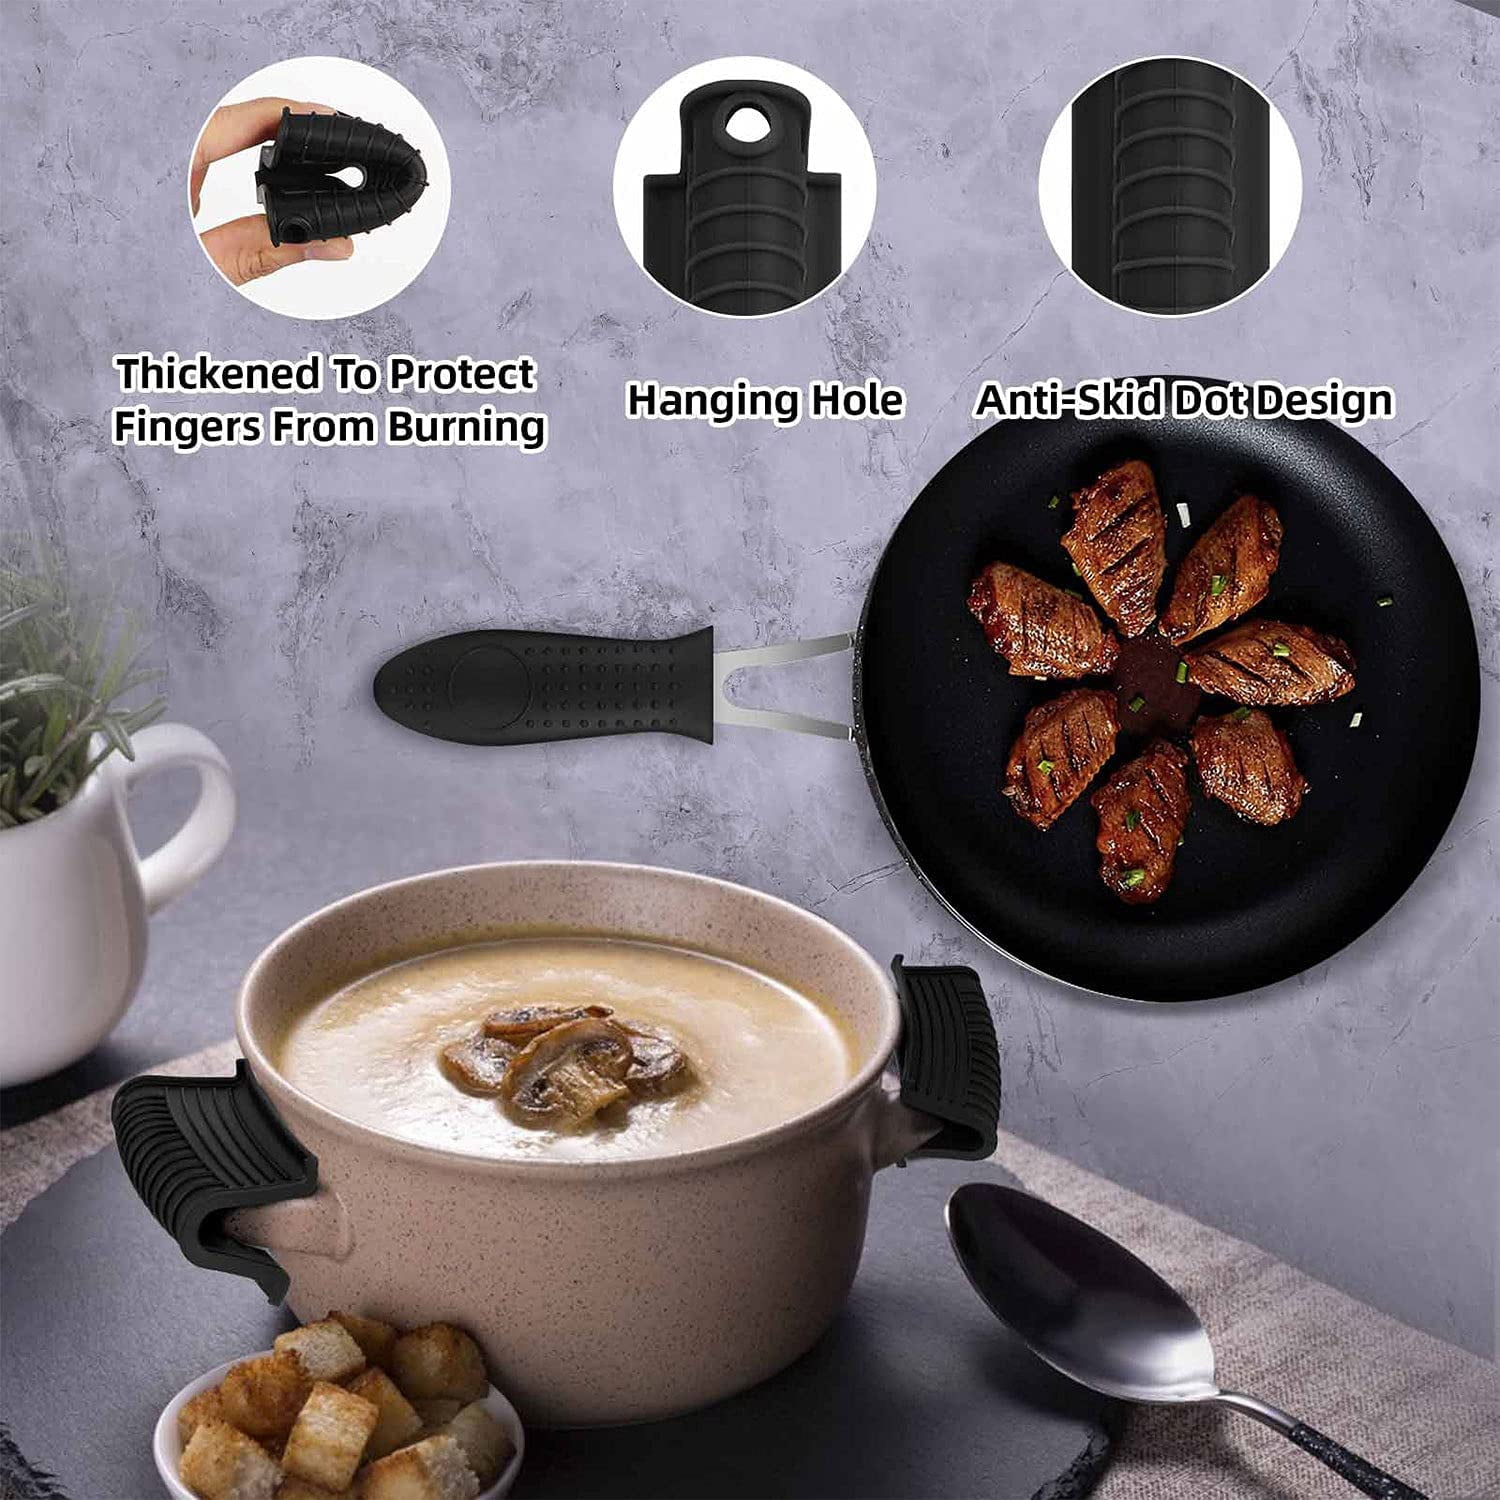 Ayabay 2pcs Silicone Hot Handle Cover Potholder Cast Iron Skillets Sleeve Grip Cover Red & Black, Size: 5.6 Long x 1.9 Wide